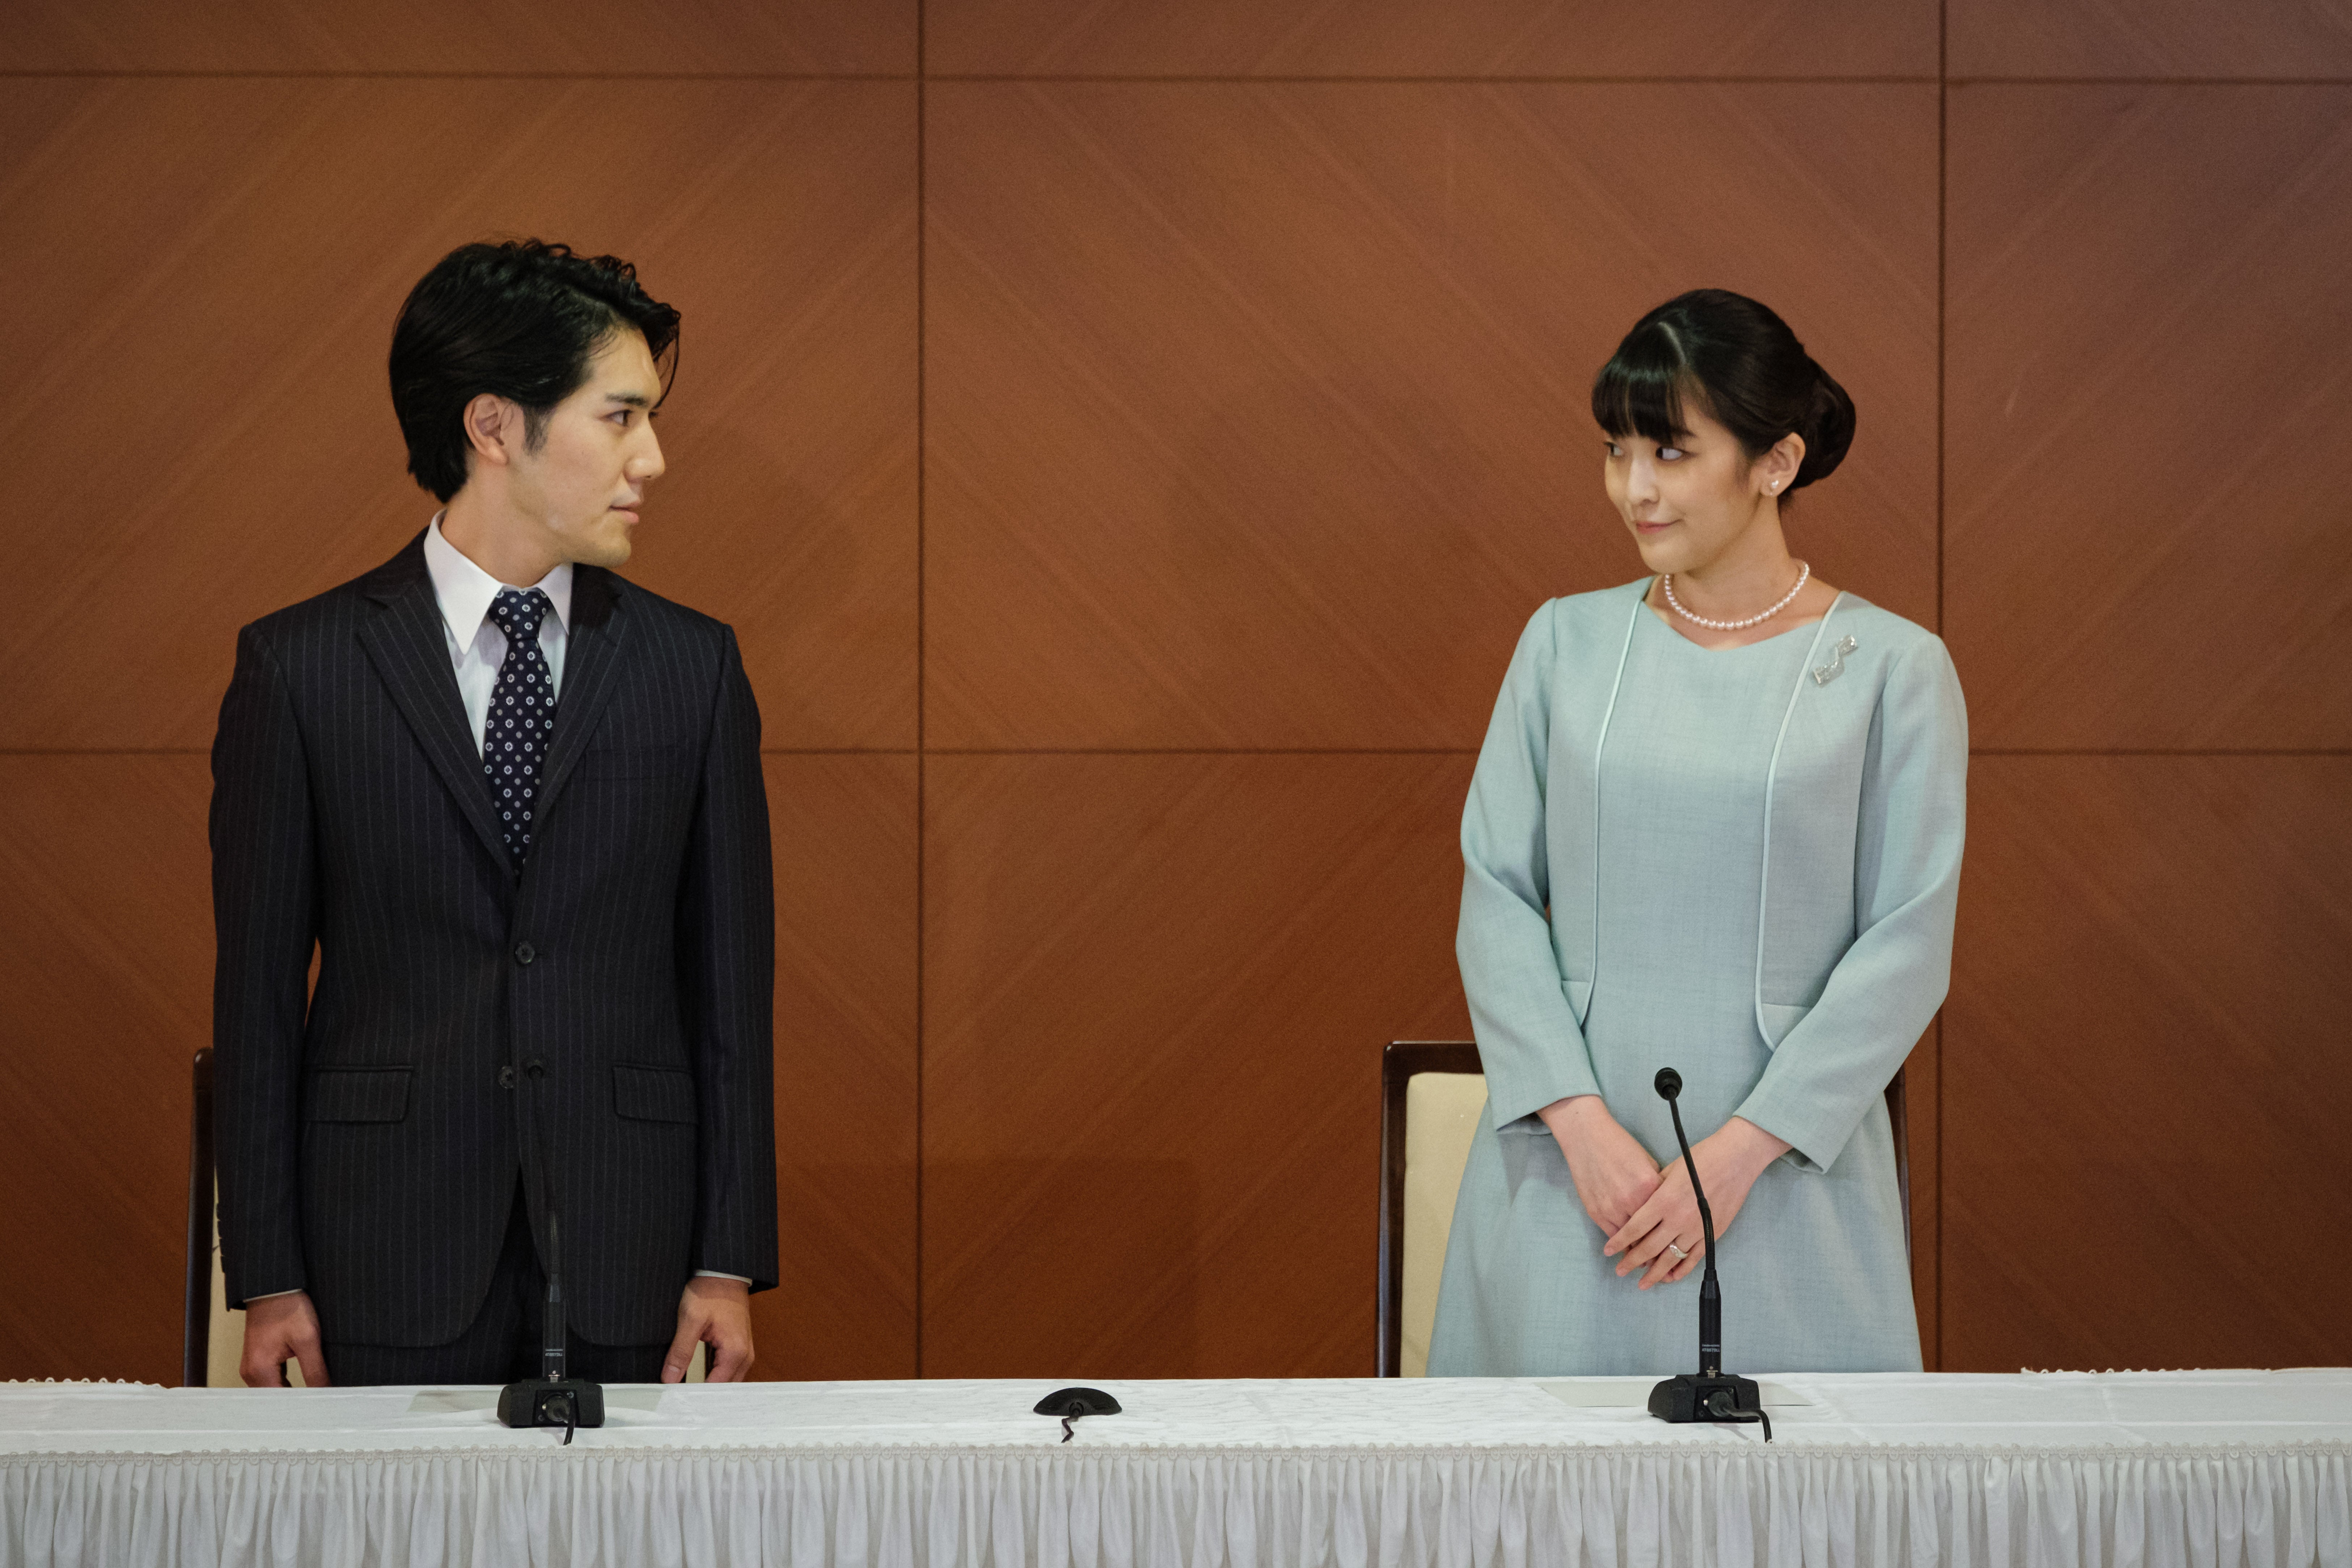 Former Japanese Princess Mako and her new husband move to New York City